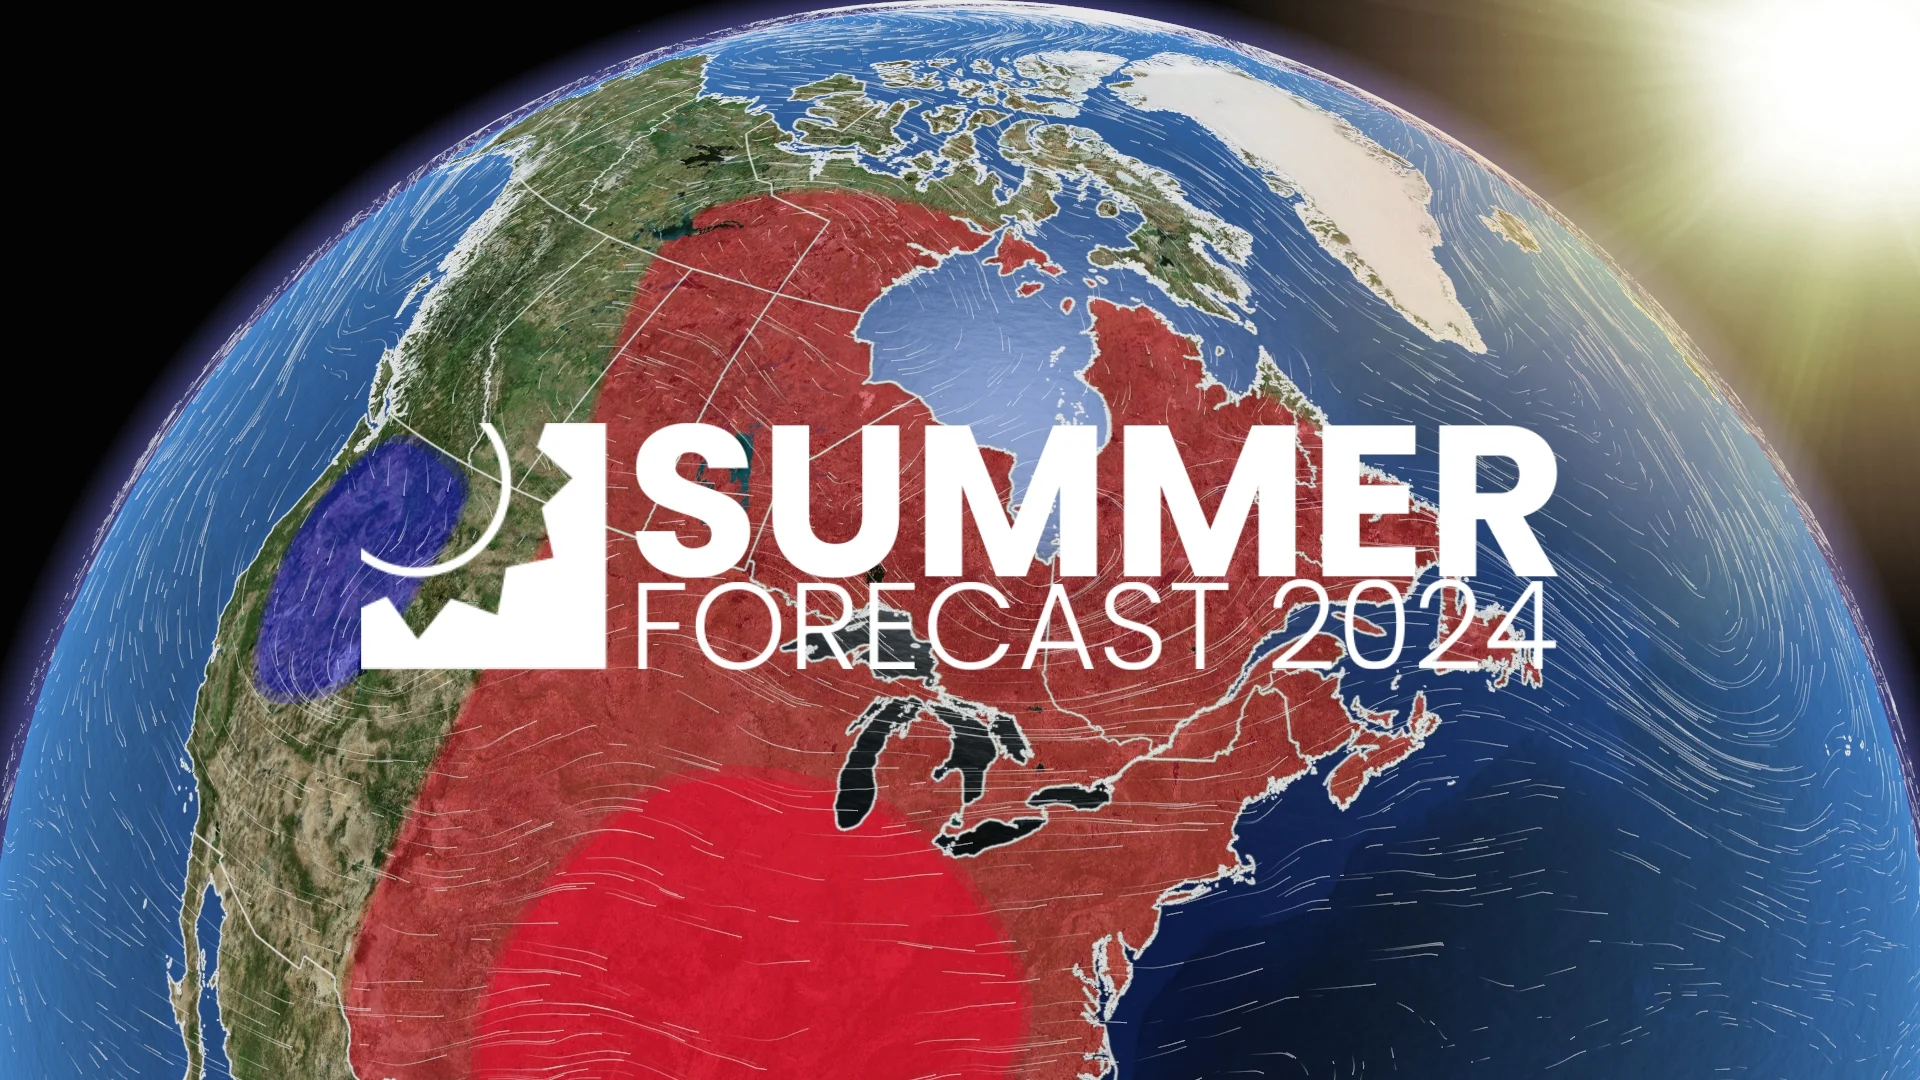 Warm and sunny. It looks like the perfect summer is shaping up across Saskatchewan this year. See what's ahead in our Summer Forecast, here